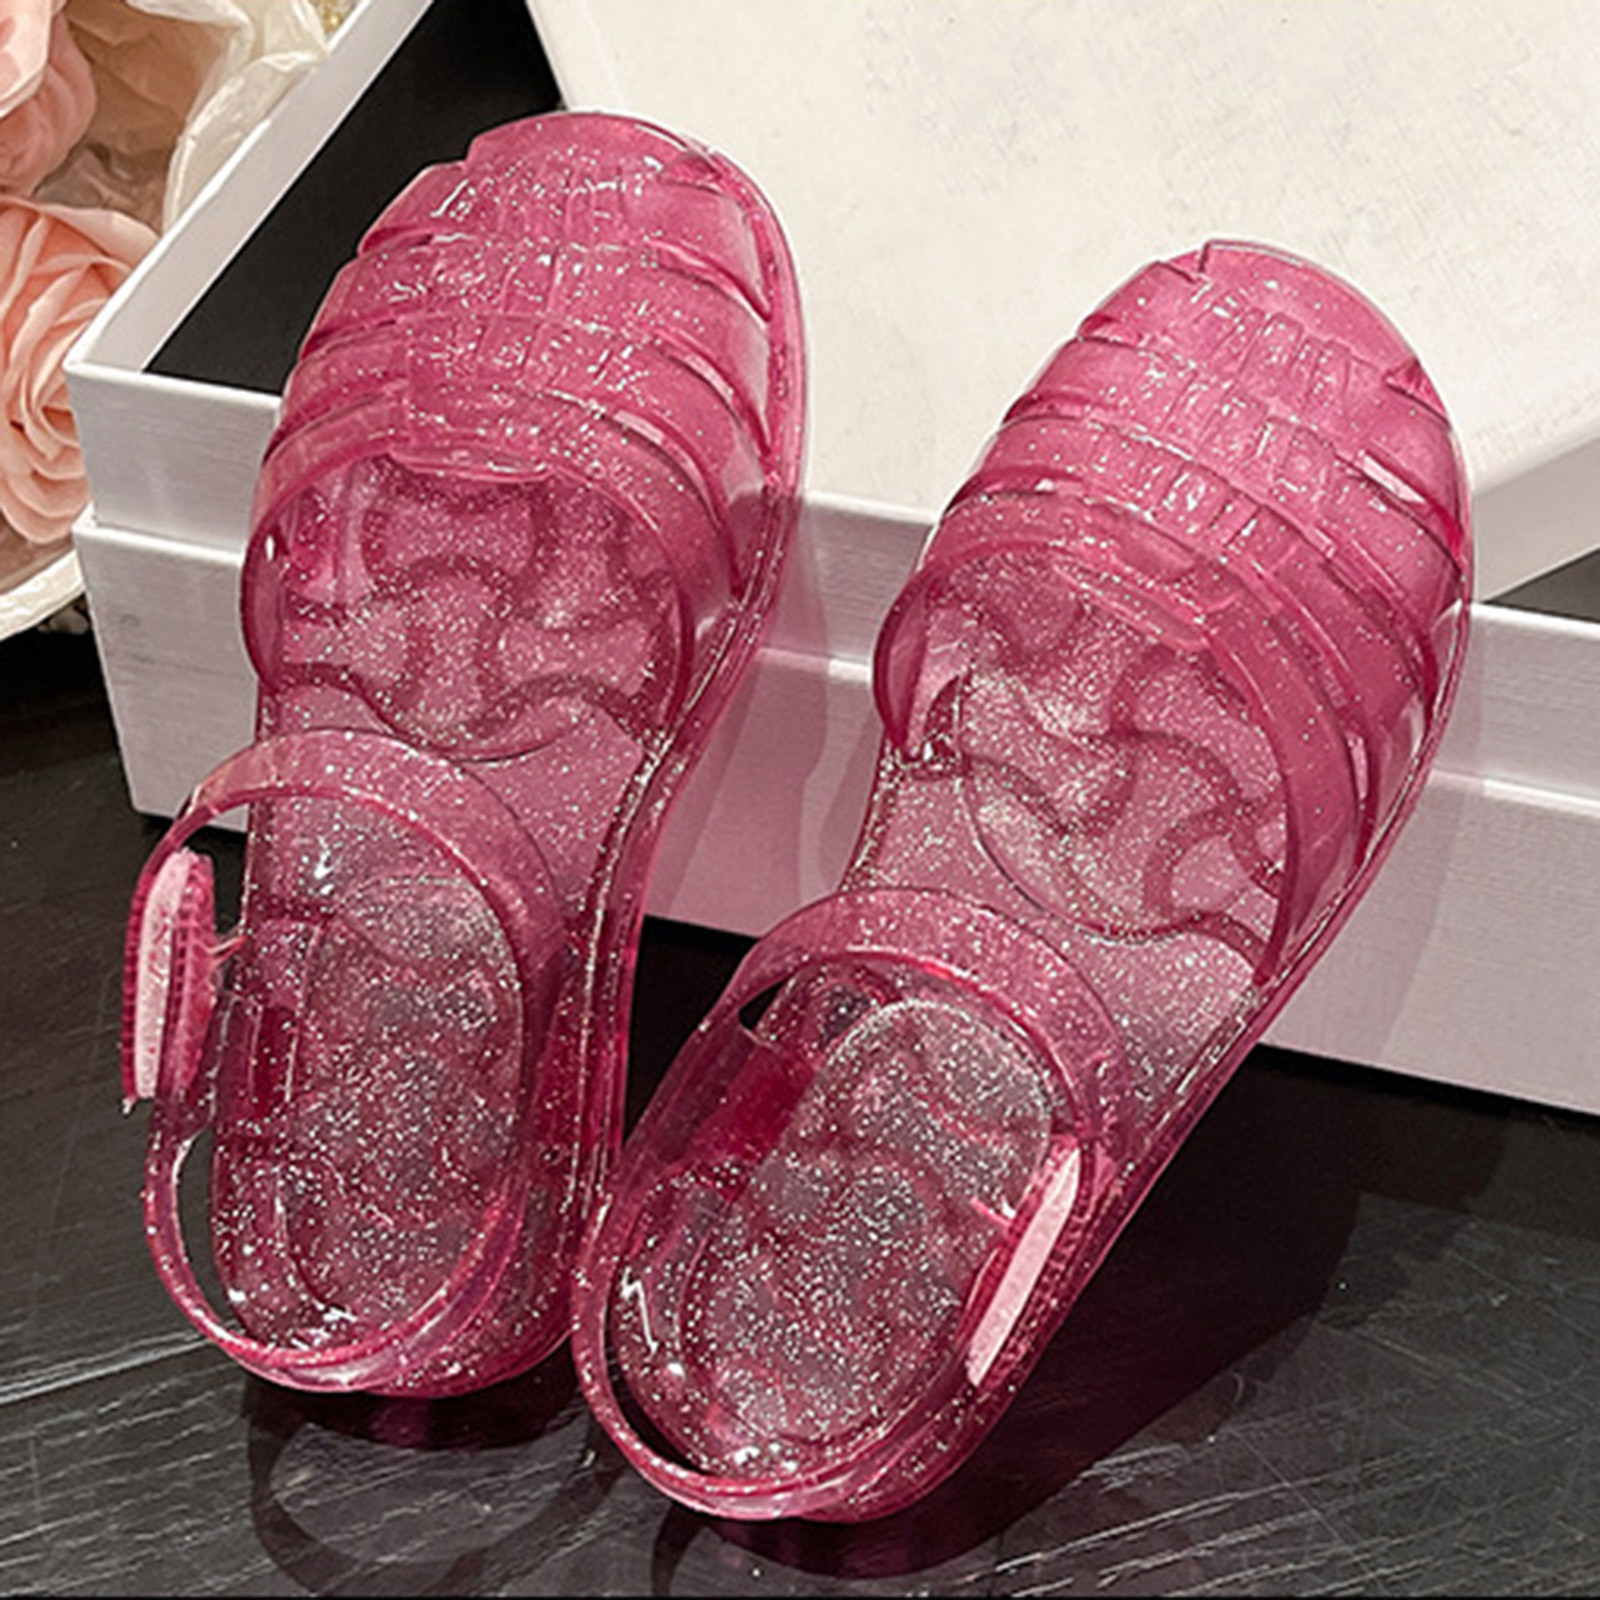 Clearance! SDJMa Jelly Shoes for Toddler Girls Summer Beach Retro Sandals T-Strap Slingback Little Kids Glitter Soft Closed Toe Princess Dress Flat - image 4 of 9